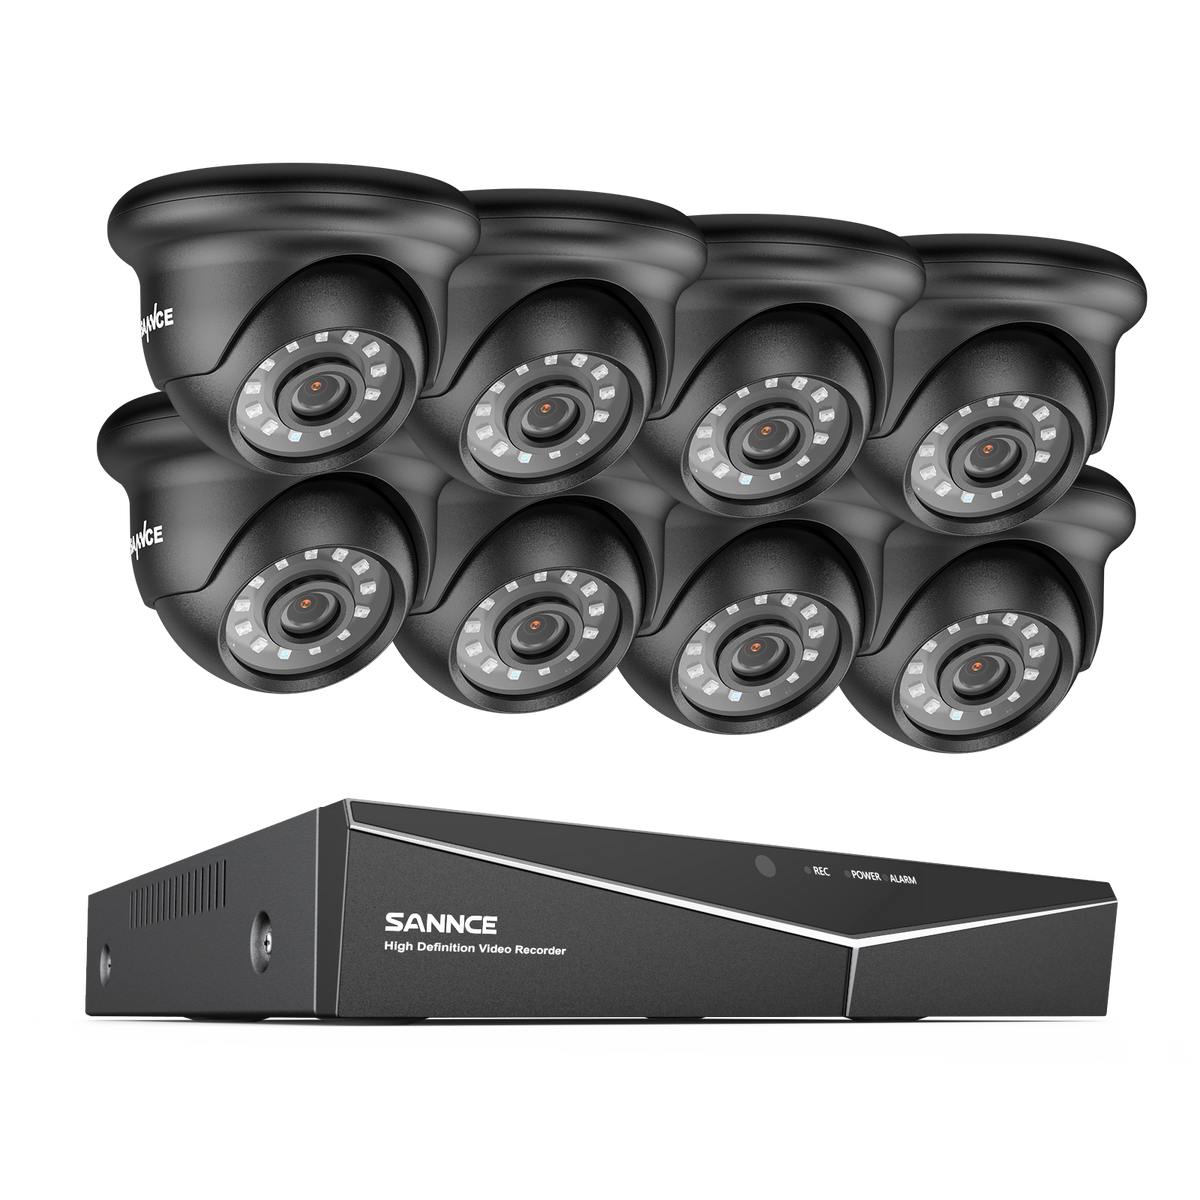 8 Channel 1080P Wired Security Camera System - Hybrid DVR, 8pcs 2MP Turret Cameras, Outdoor & Indoor, Smart Motion Detection, Remote Access